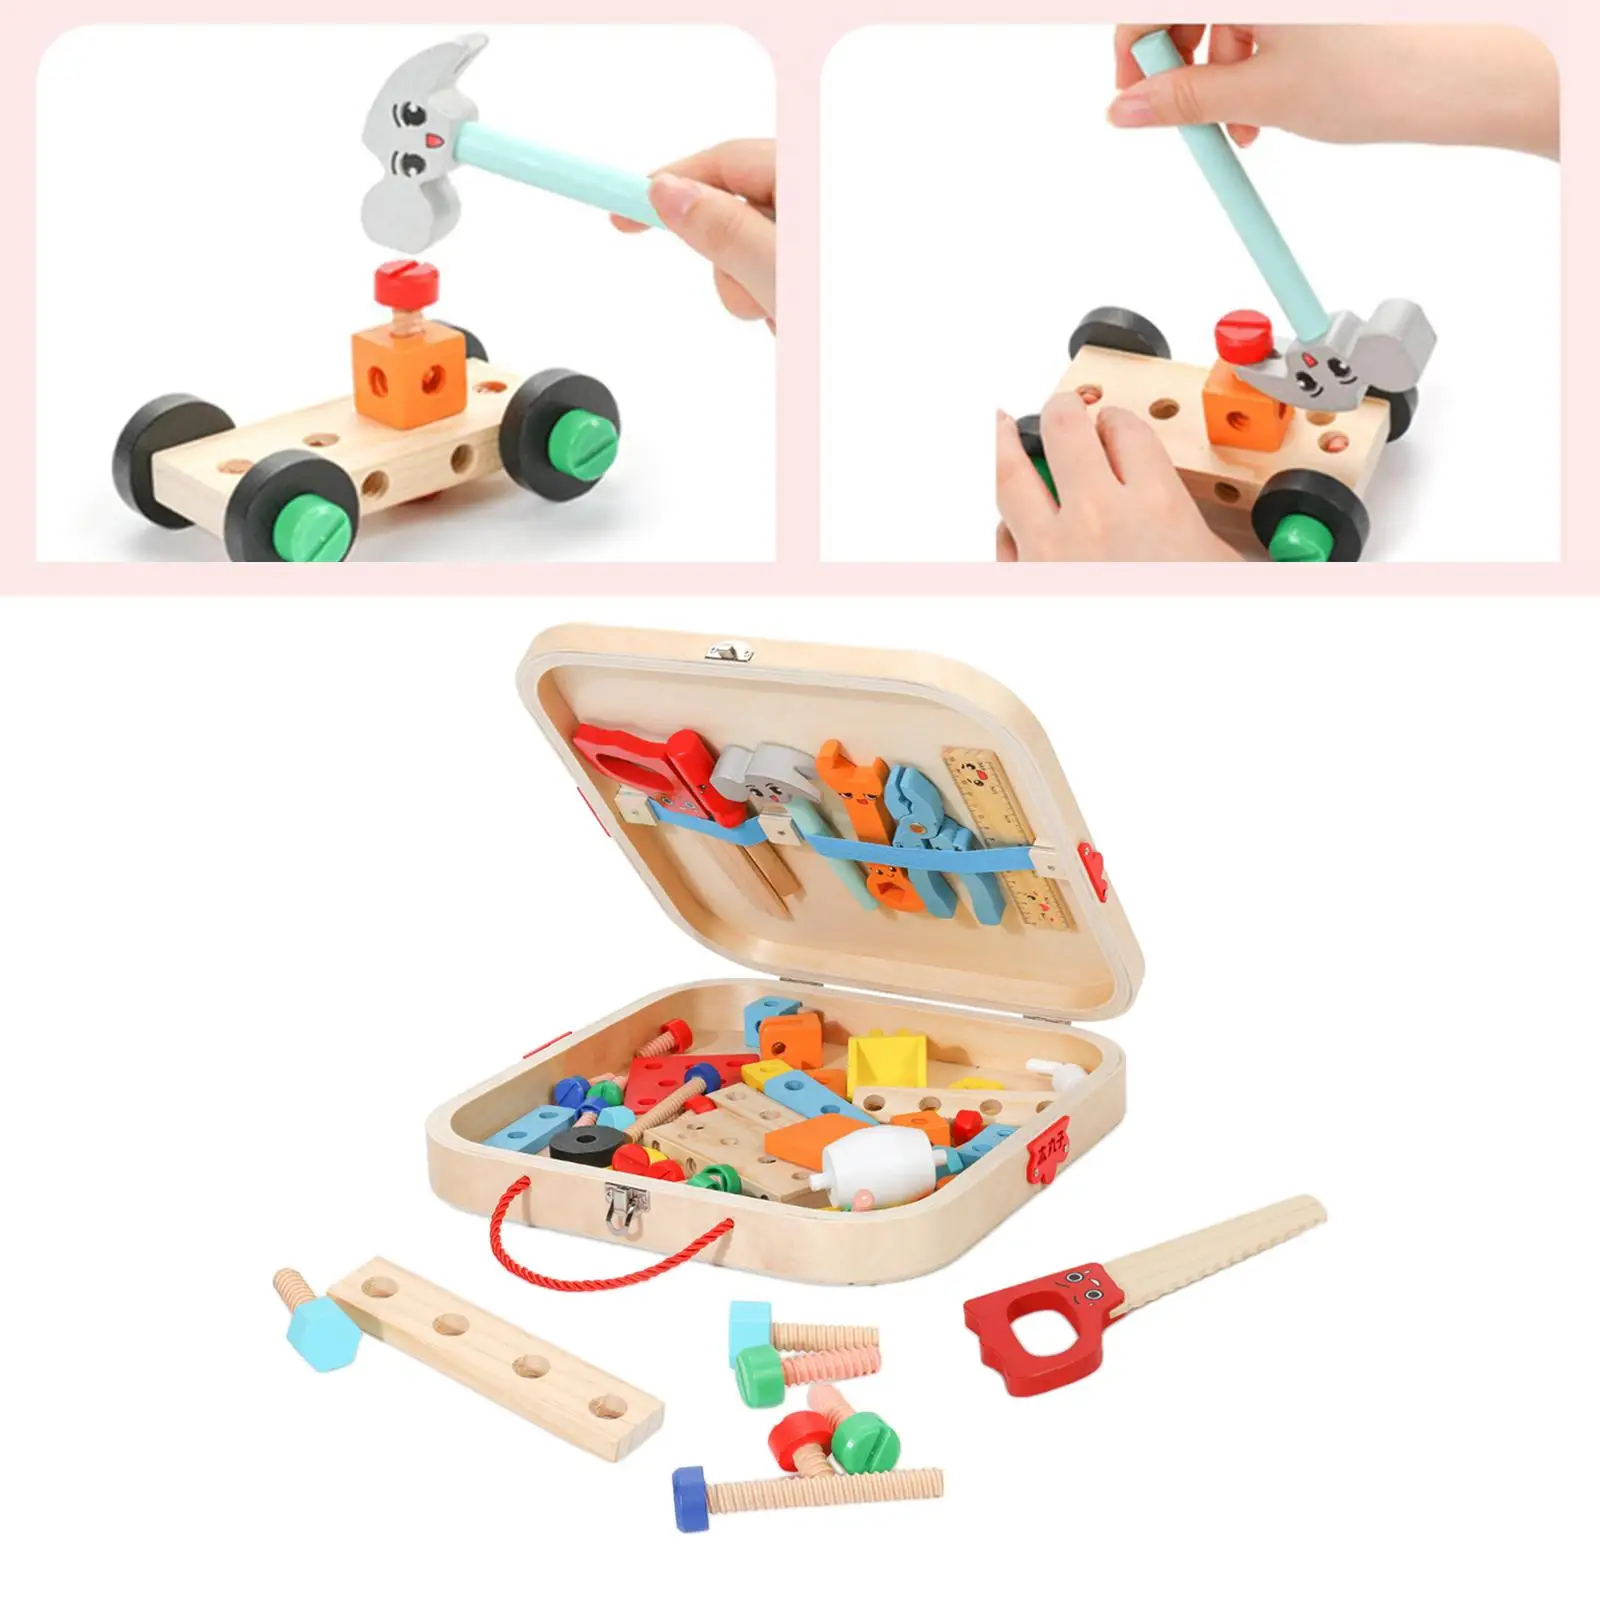 Kids Tool Set Toy Tools Colorful Tool Set Pretend Play Toolbox Pretend Toy for Home Birthday Gift Bedroom Living Room Kids